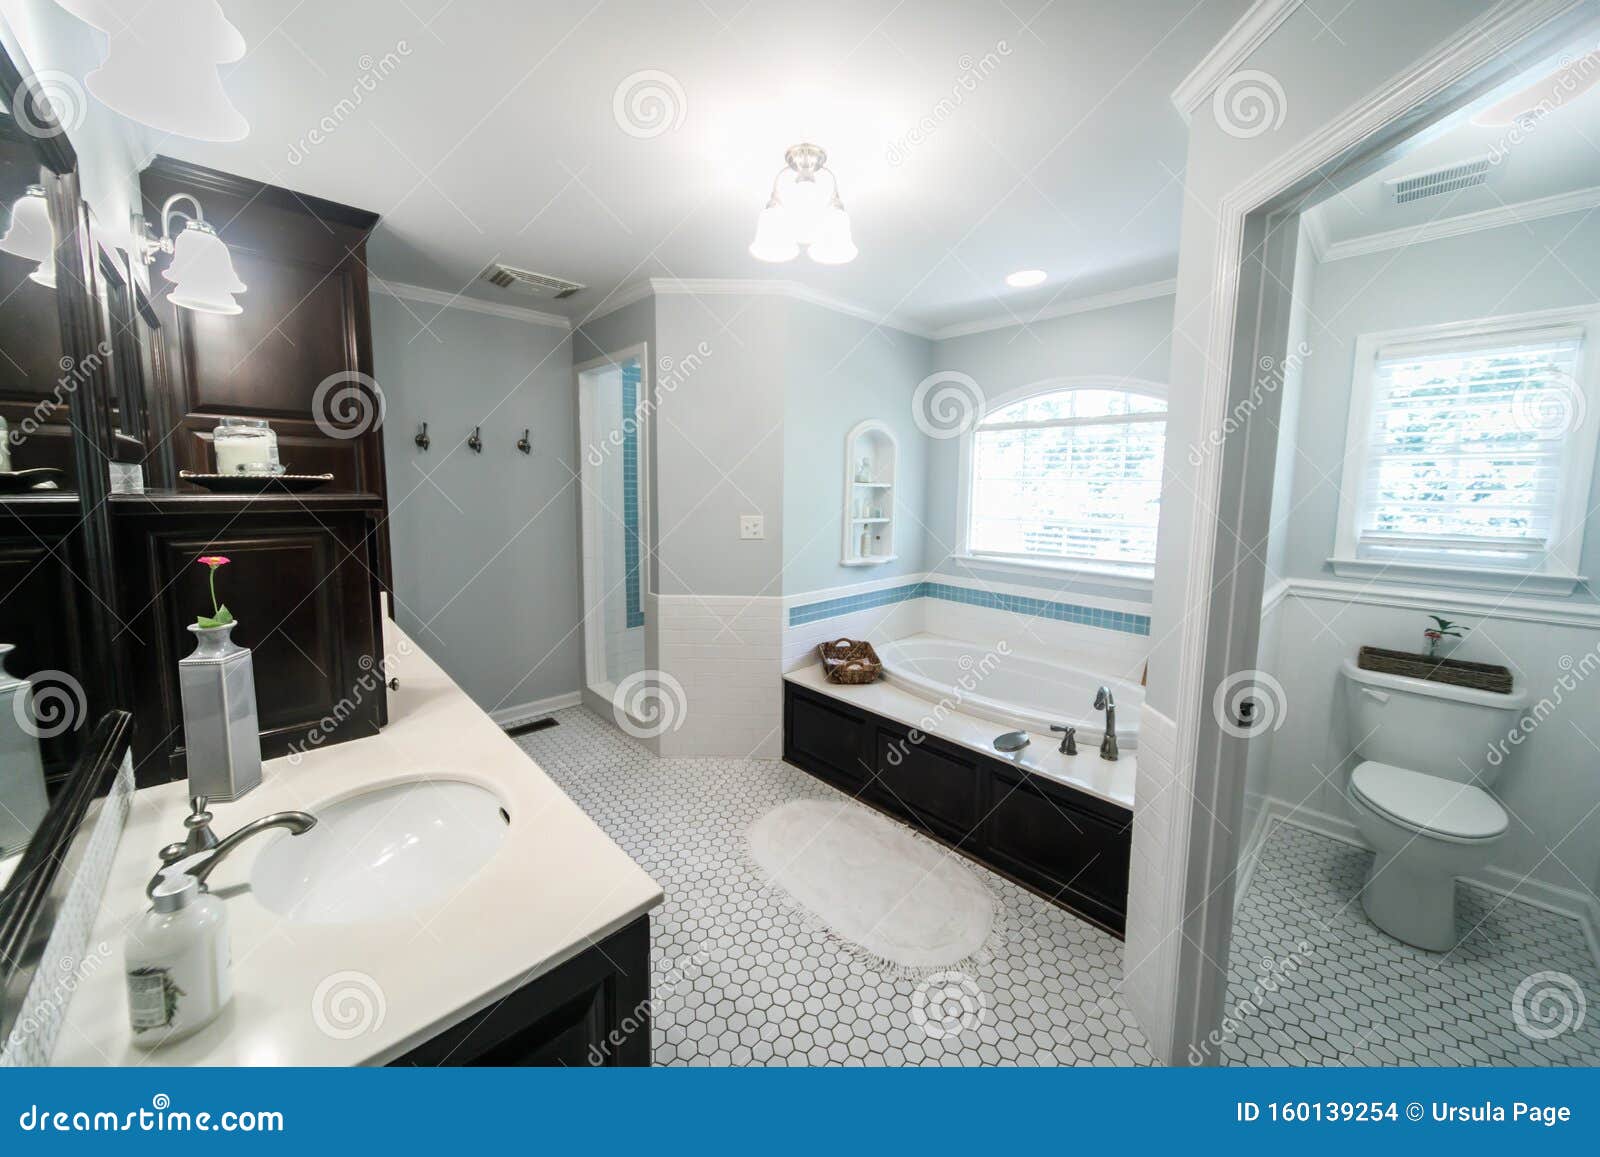 1950 S Style Bathroom With Tile Floor And Dark Brown Cabinets In White And Blue Accents Stock Photo Image Of Bright Accents 160139254